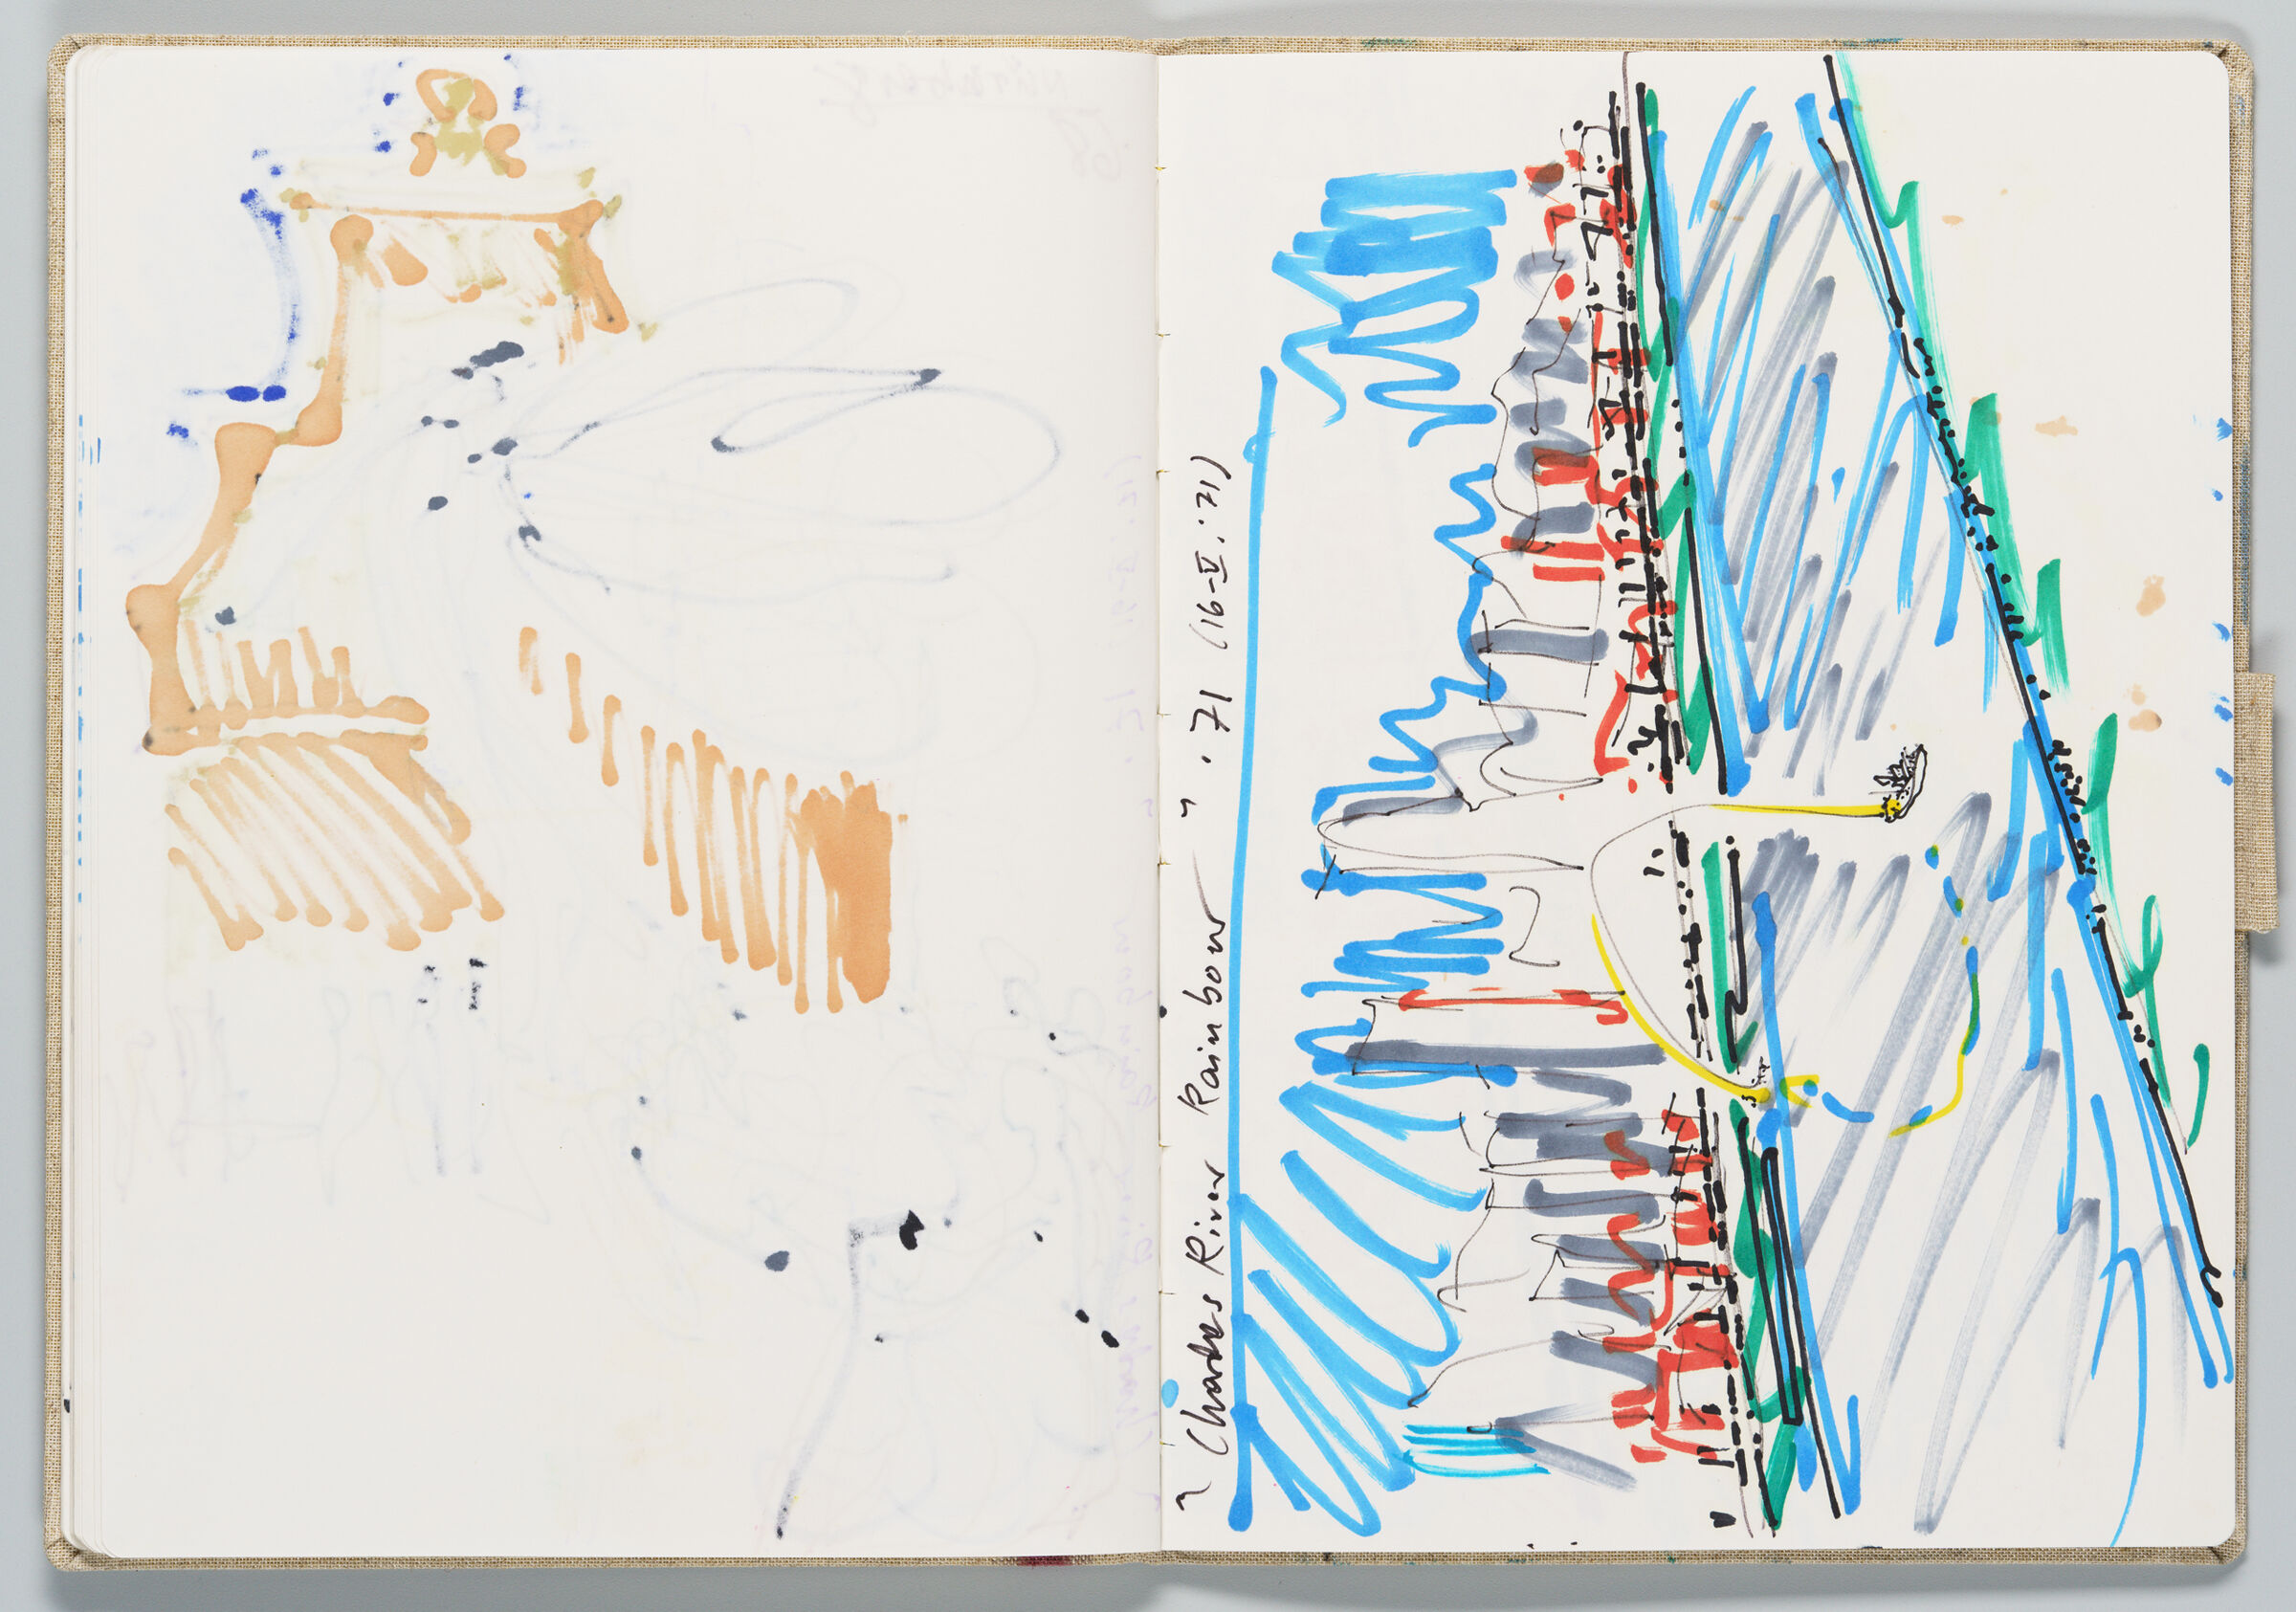 Untitled (Bleed-Through Of Previous Page With Color Transfer, Left Page); Untitled (Sketch Of 